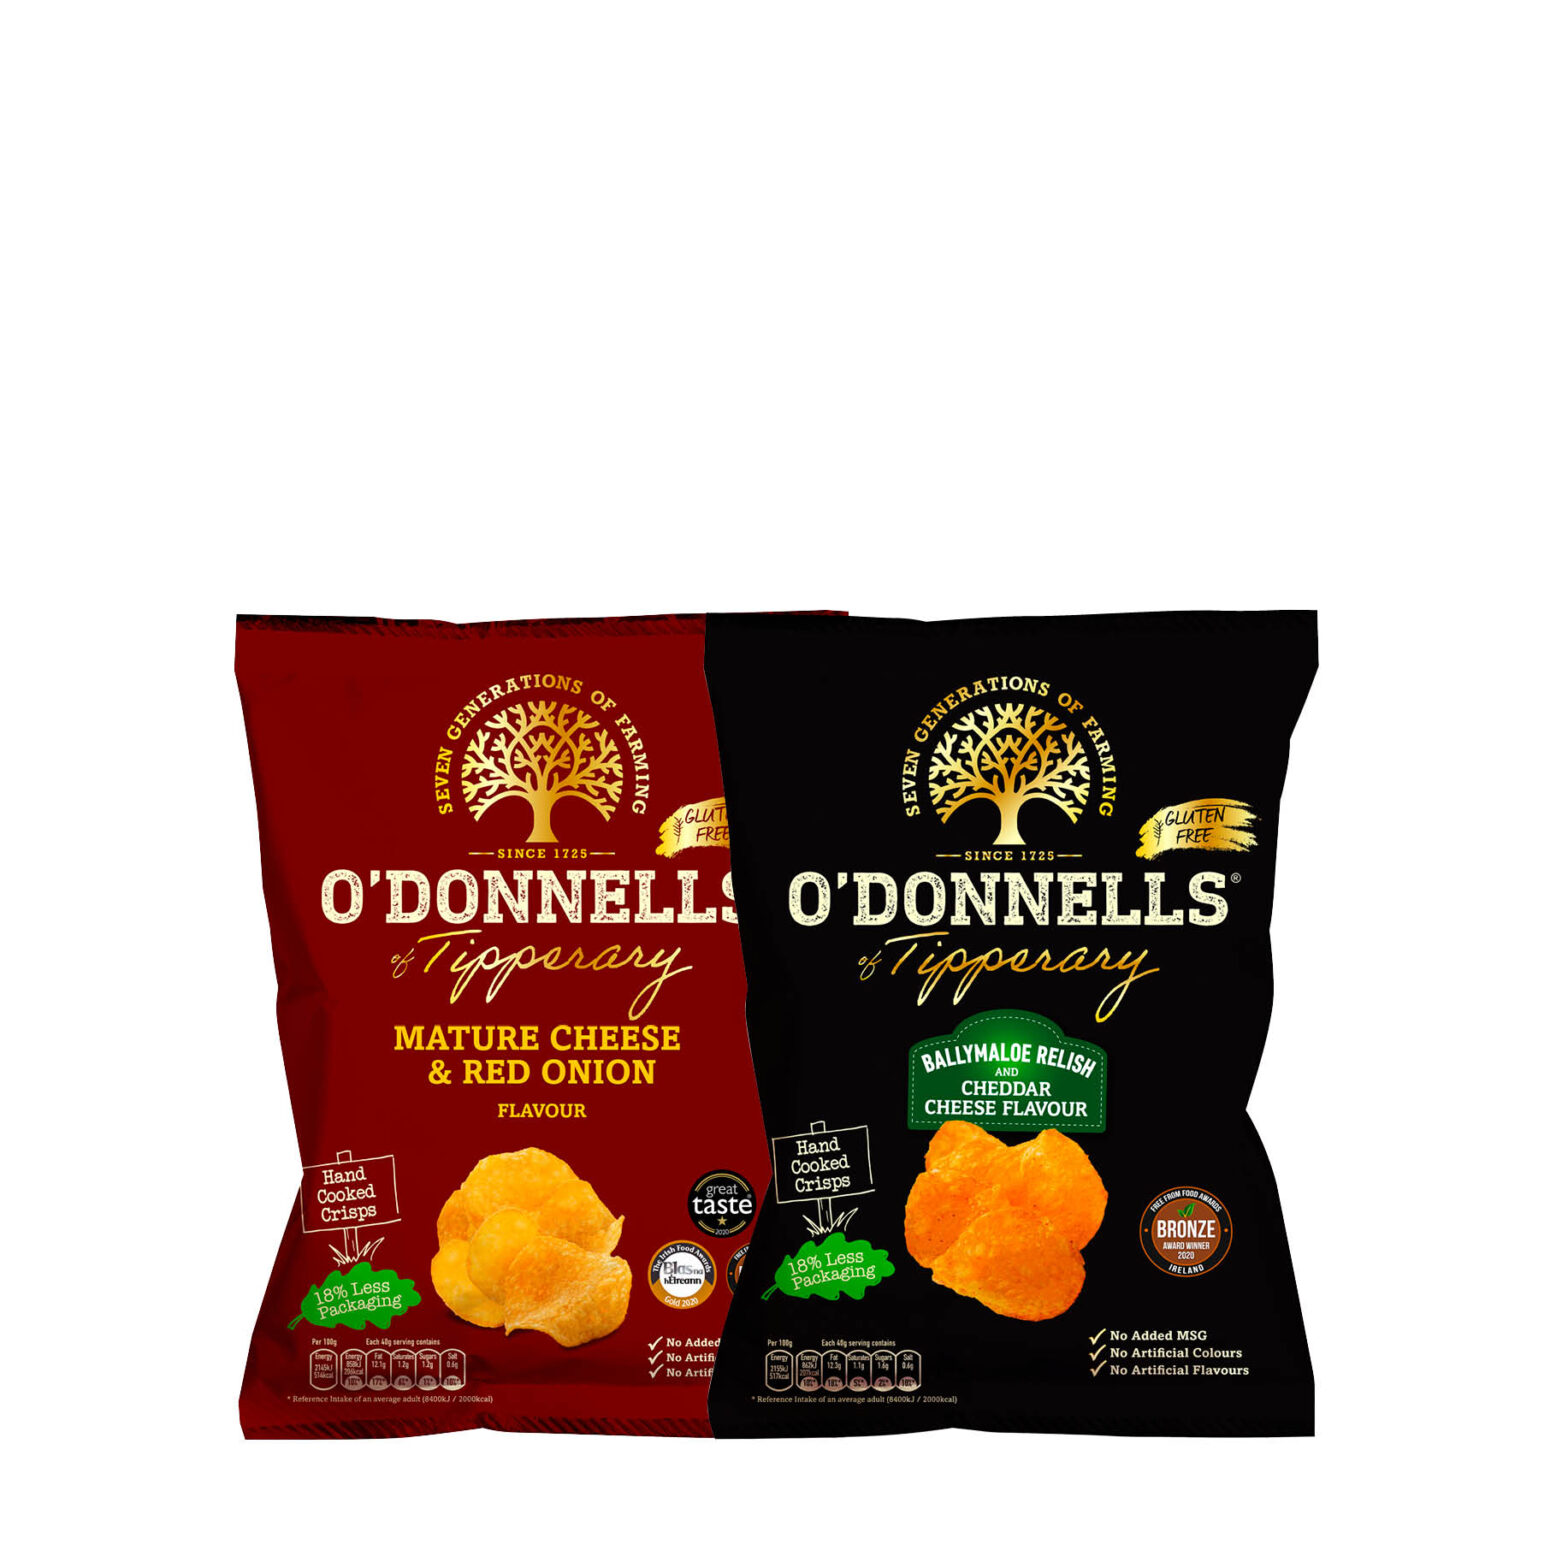 O’Donnells Mature Cheese & Red Onion Crisps / O’Donnells Ballymaloe Relish/Cheddar Cheese Crisps